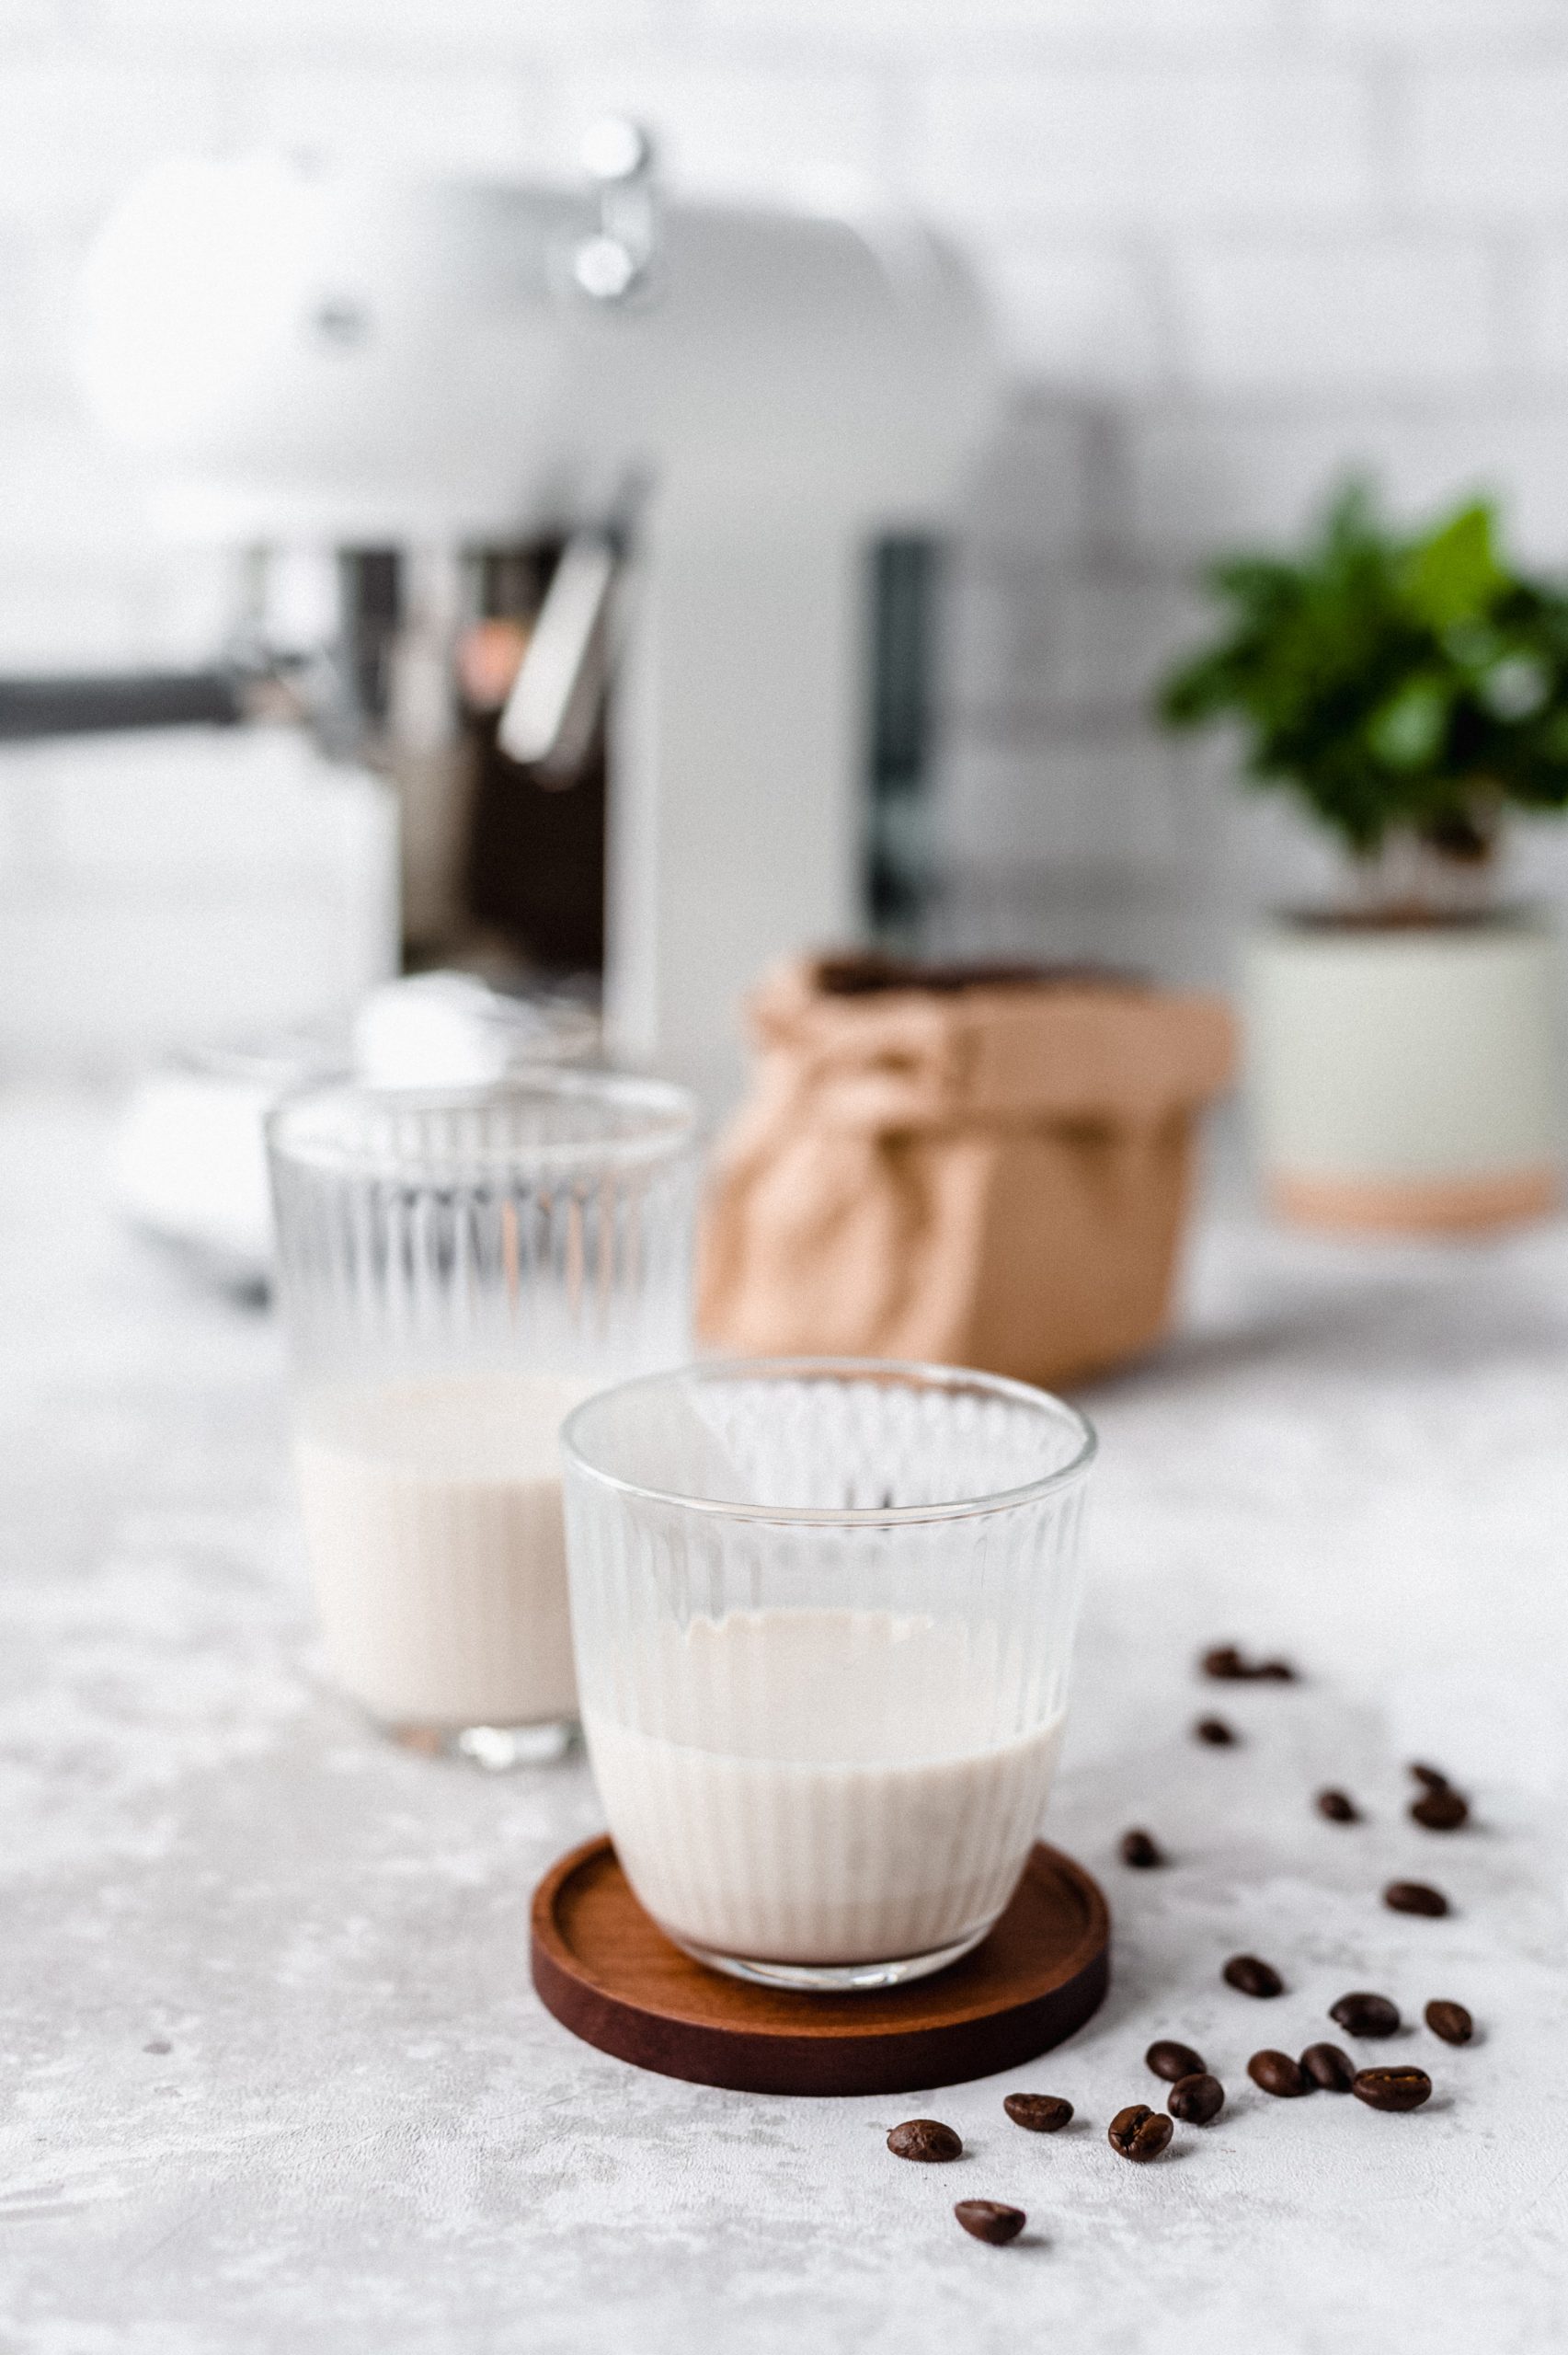 A glass of milk on a counter top shown as a good source of calcium